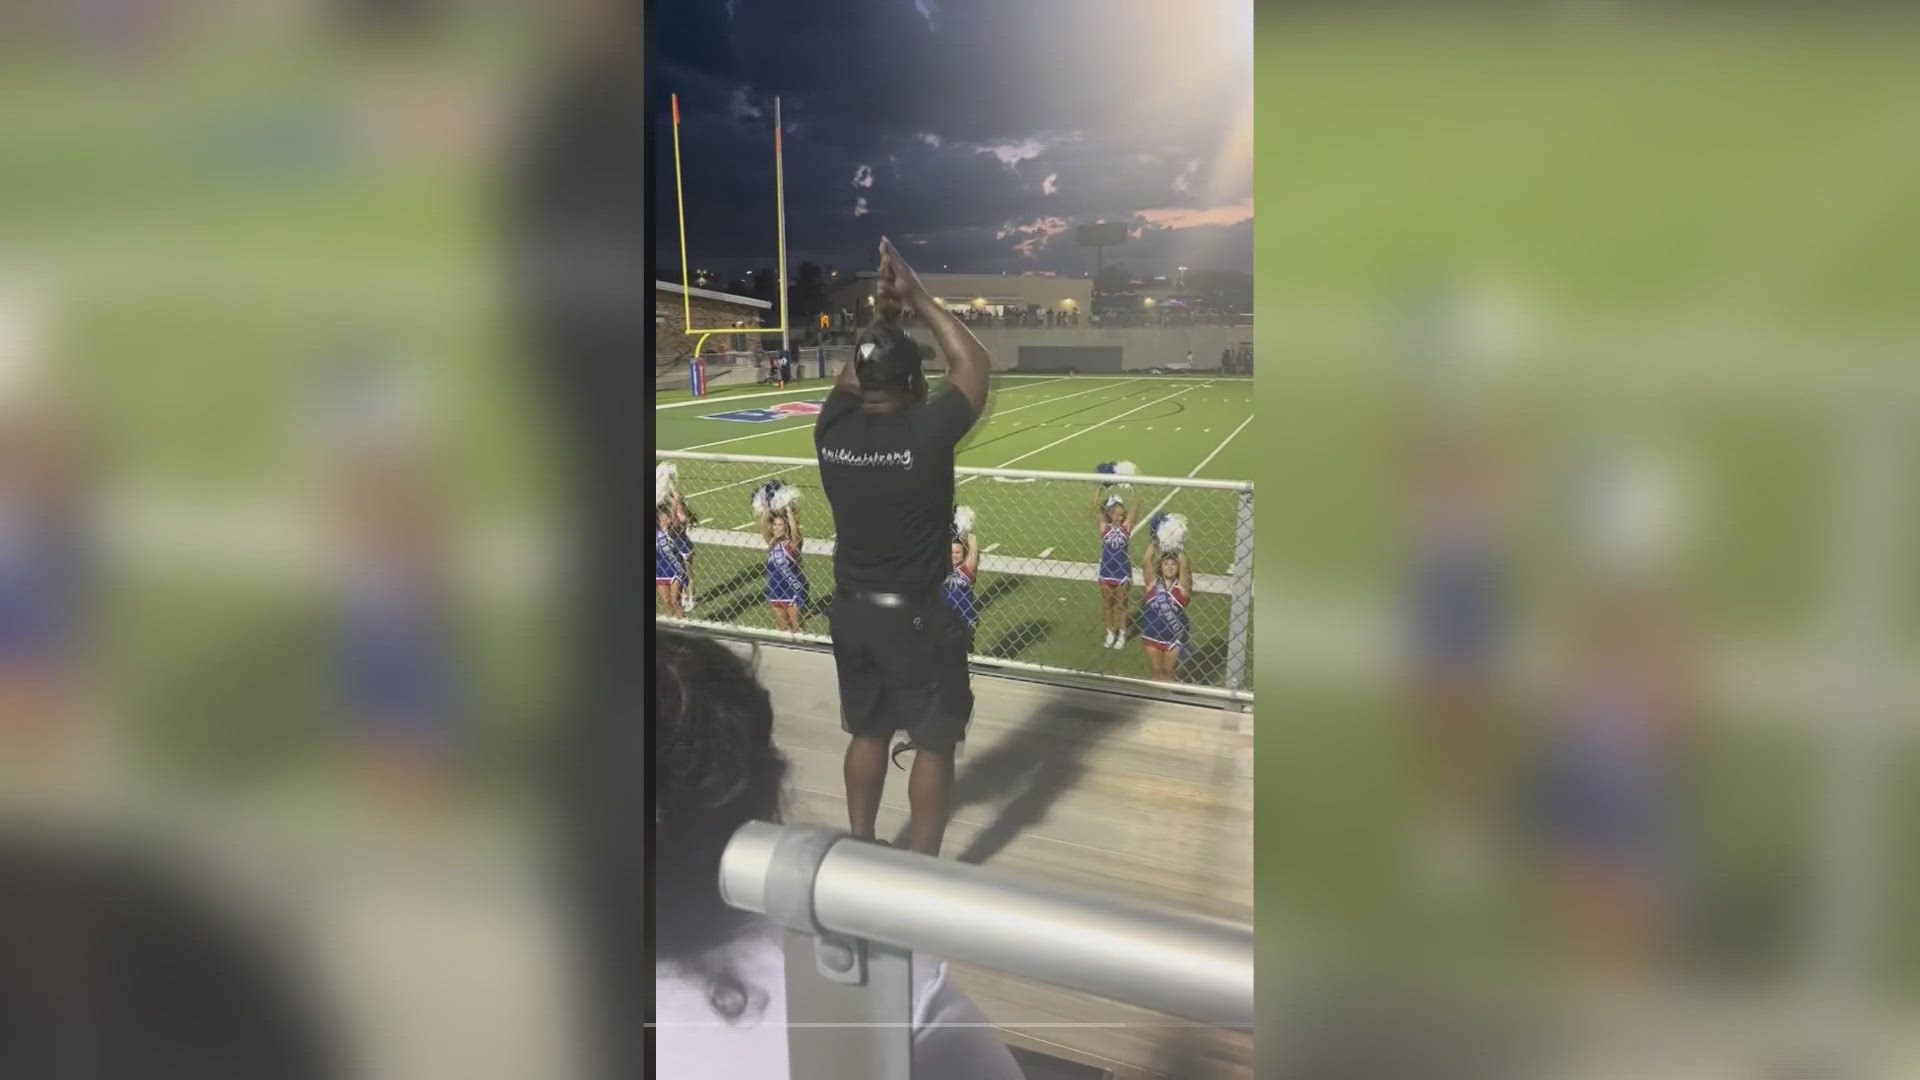 Andre Simmons has recently gone viral after a TikTok was posted by his wife Cecilia Simmons showing him dancing along to one of the cheer team's routines.